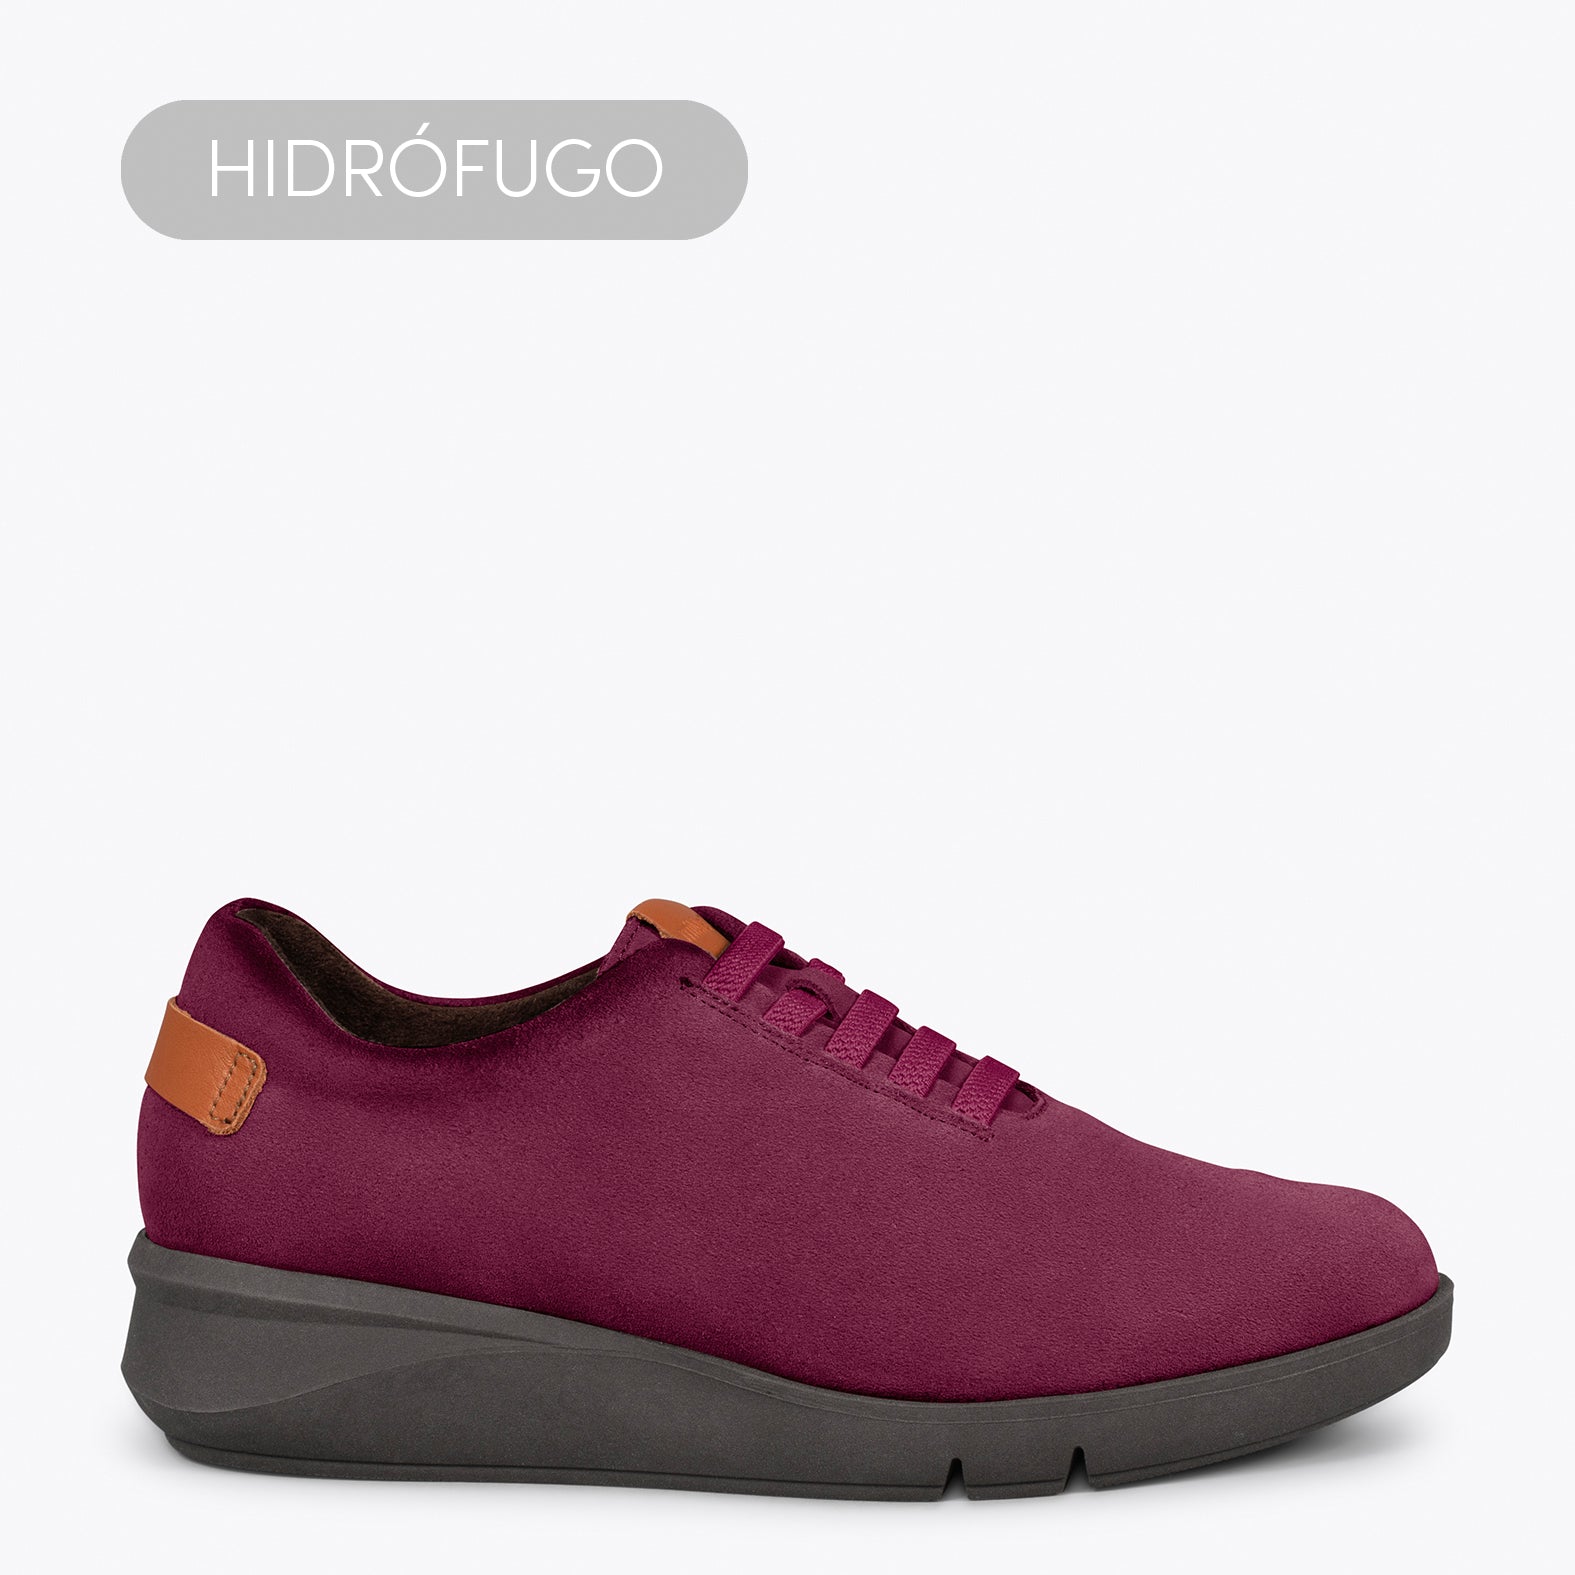 FLY – GARNET casual sneaker with elastic laces